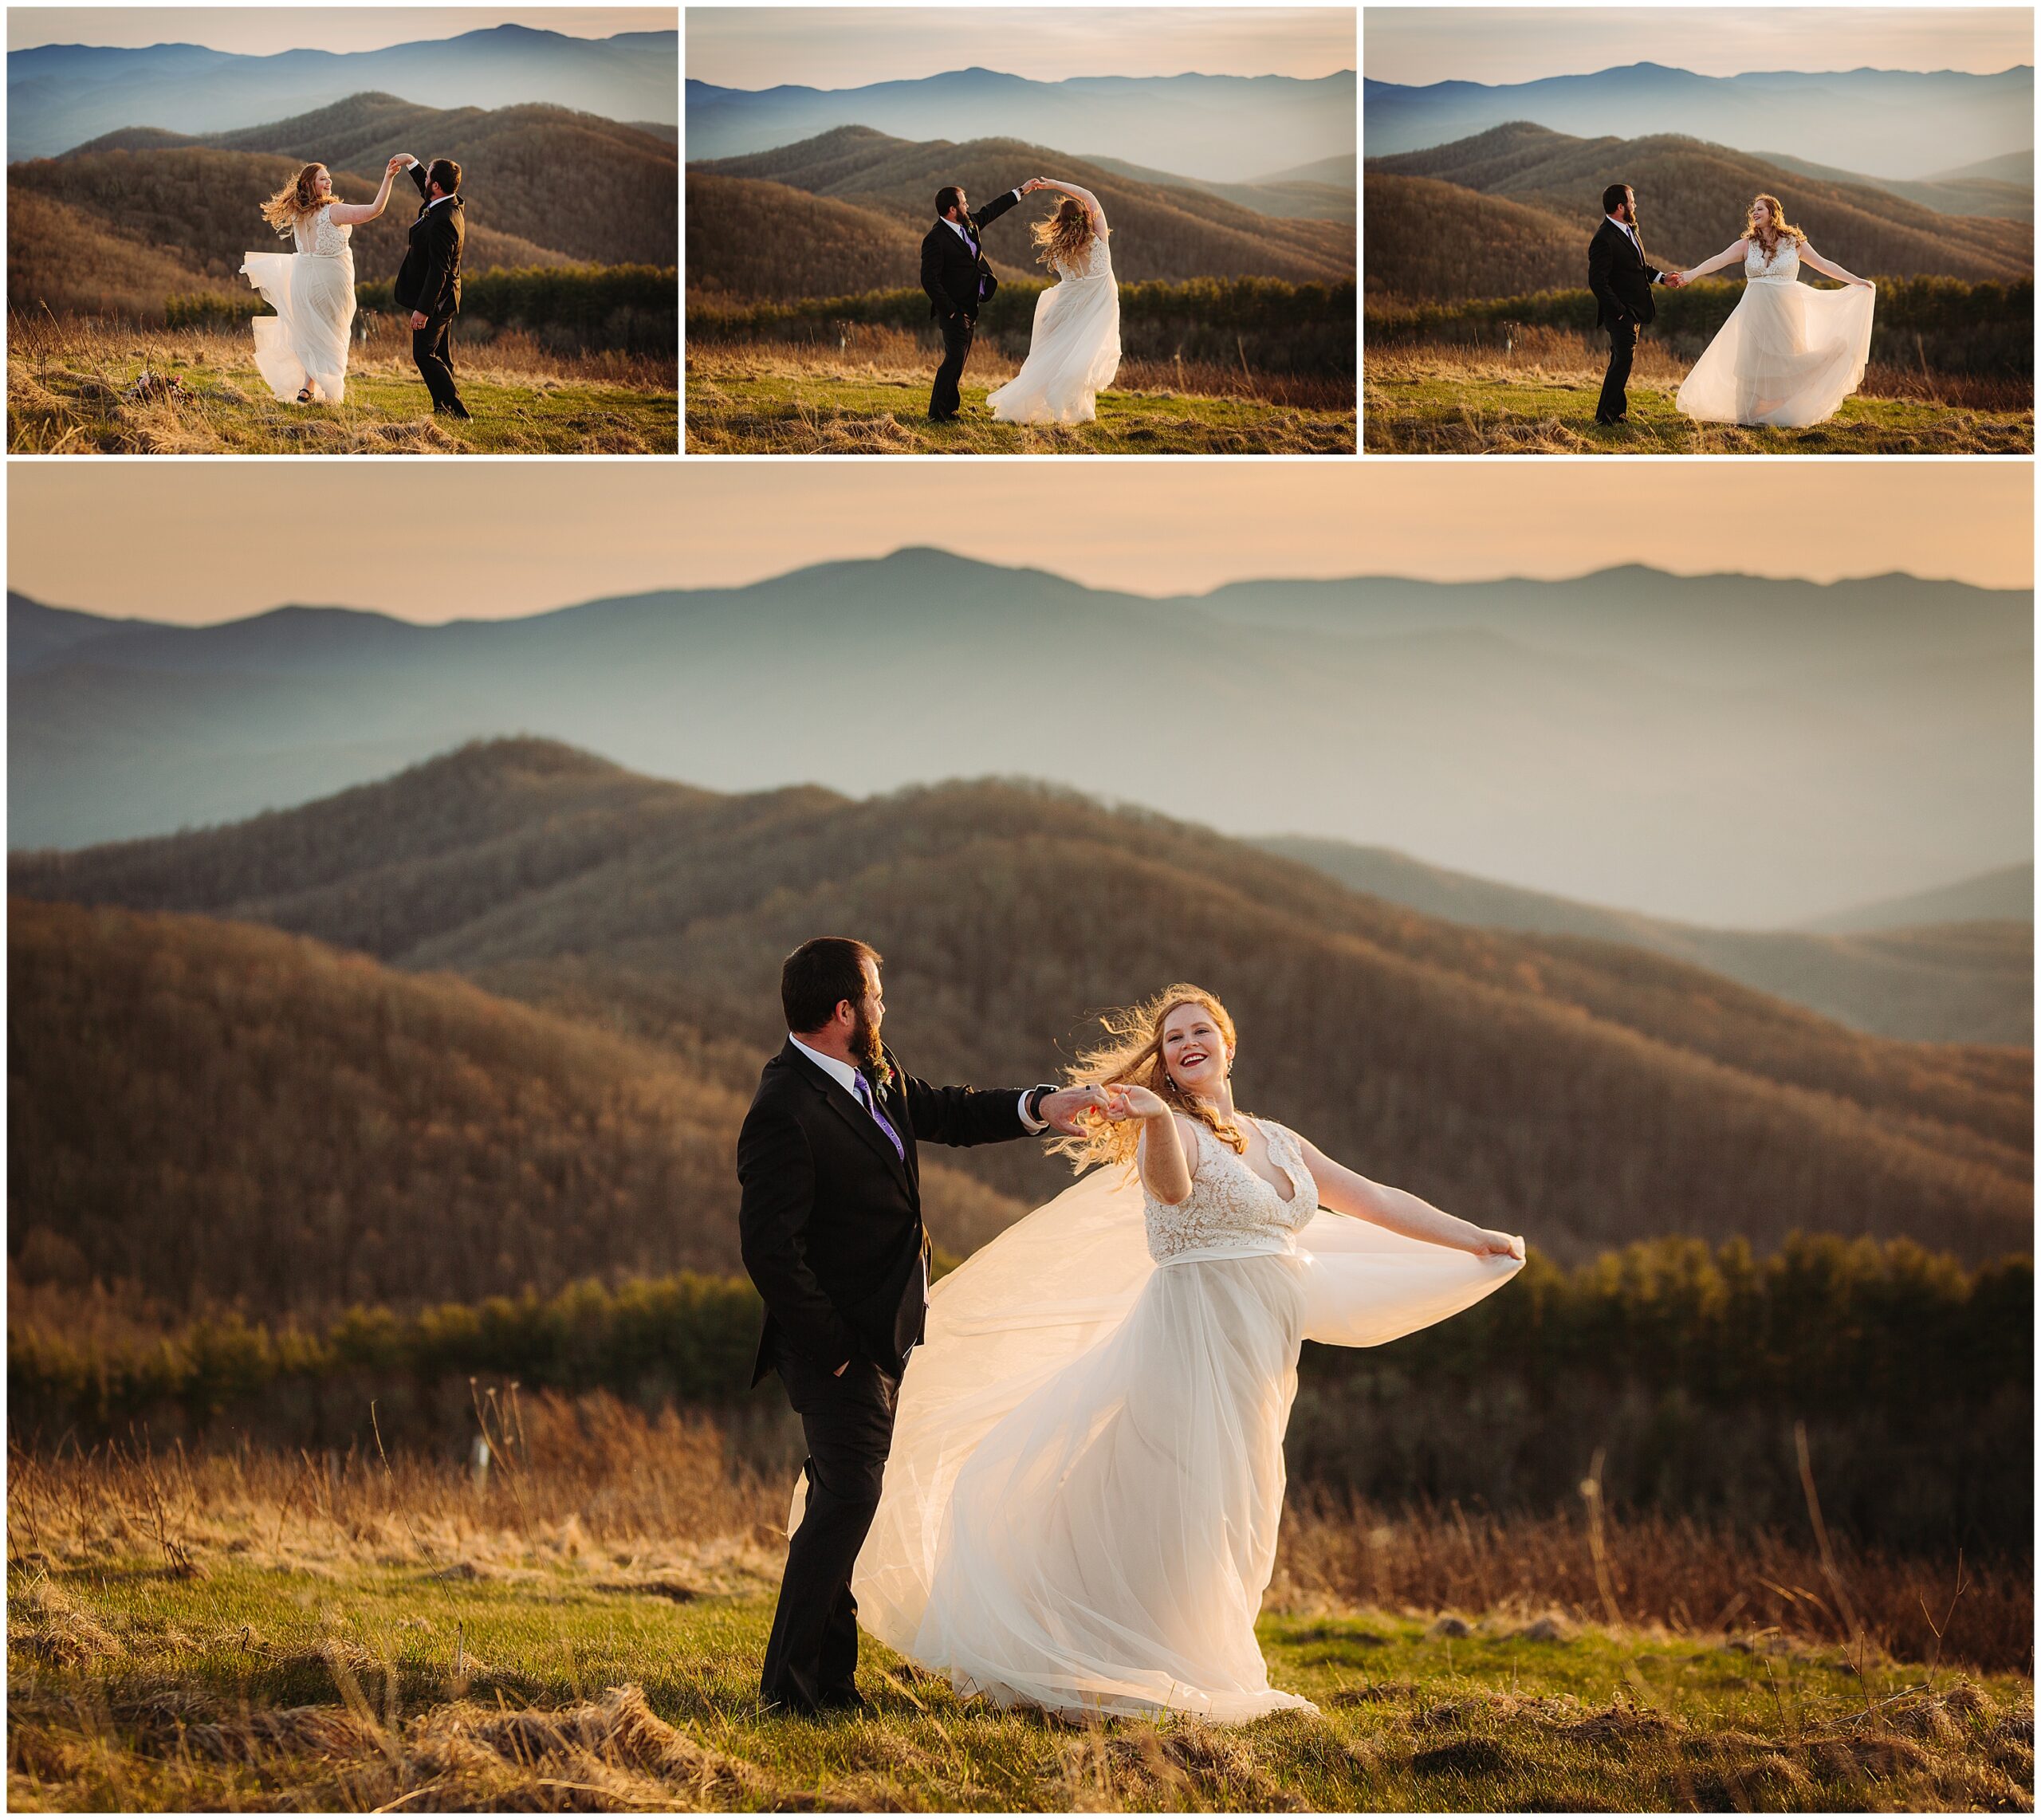 Max-Patch-Sunset-Mountain-Elopement